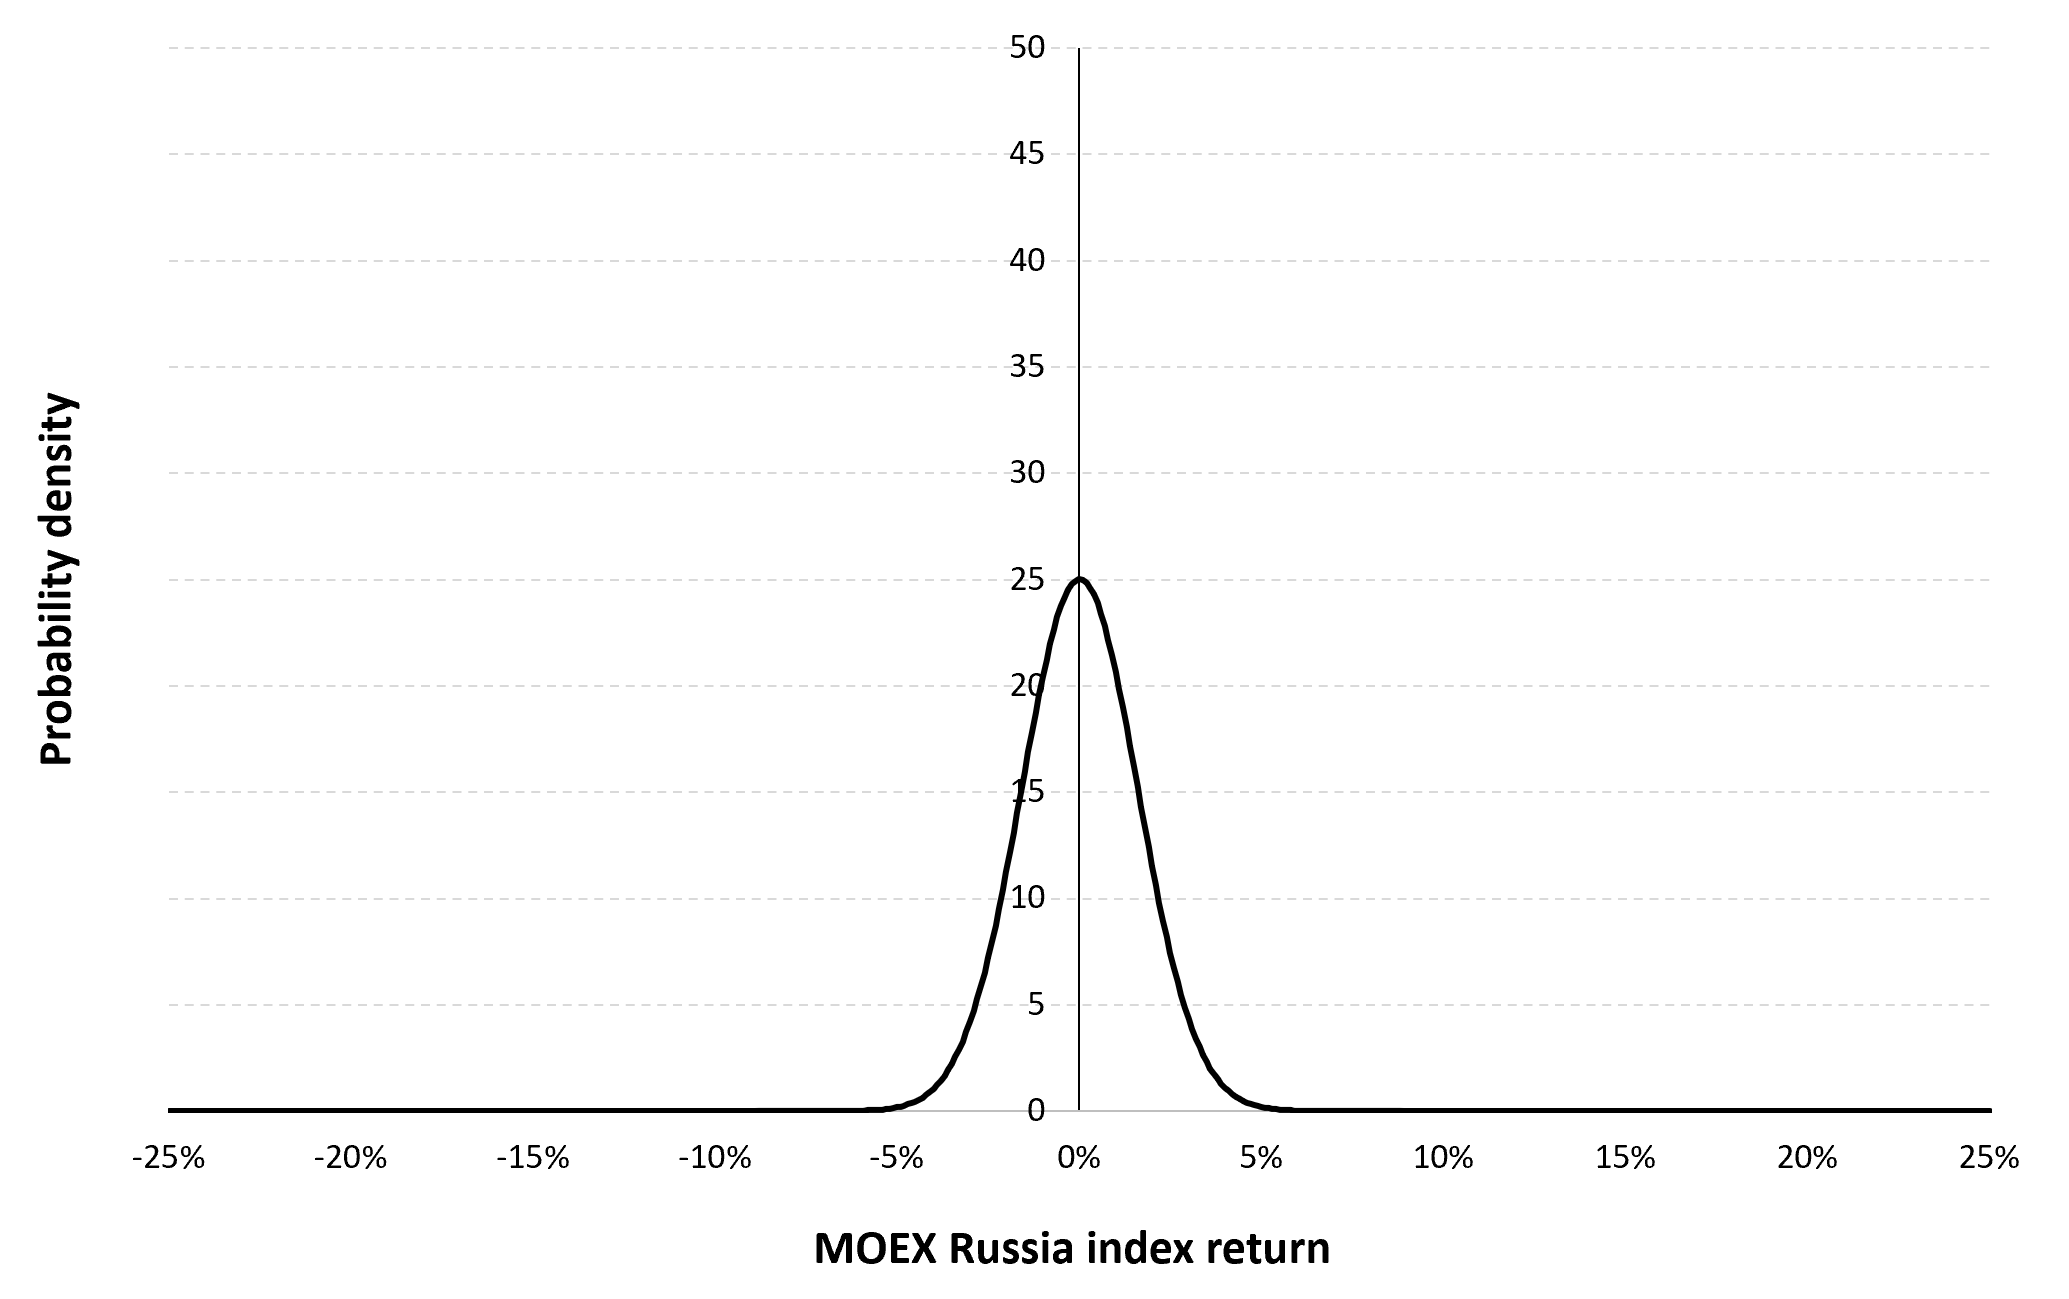 Gaussian distribution of the daily MOEX Russia index returns